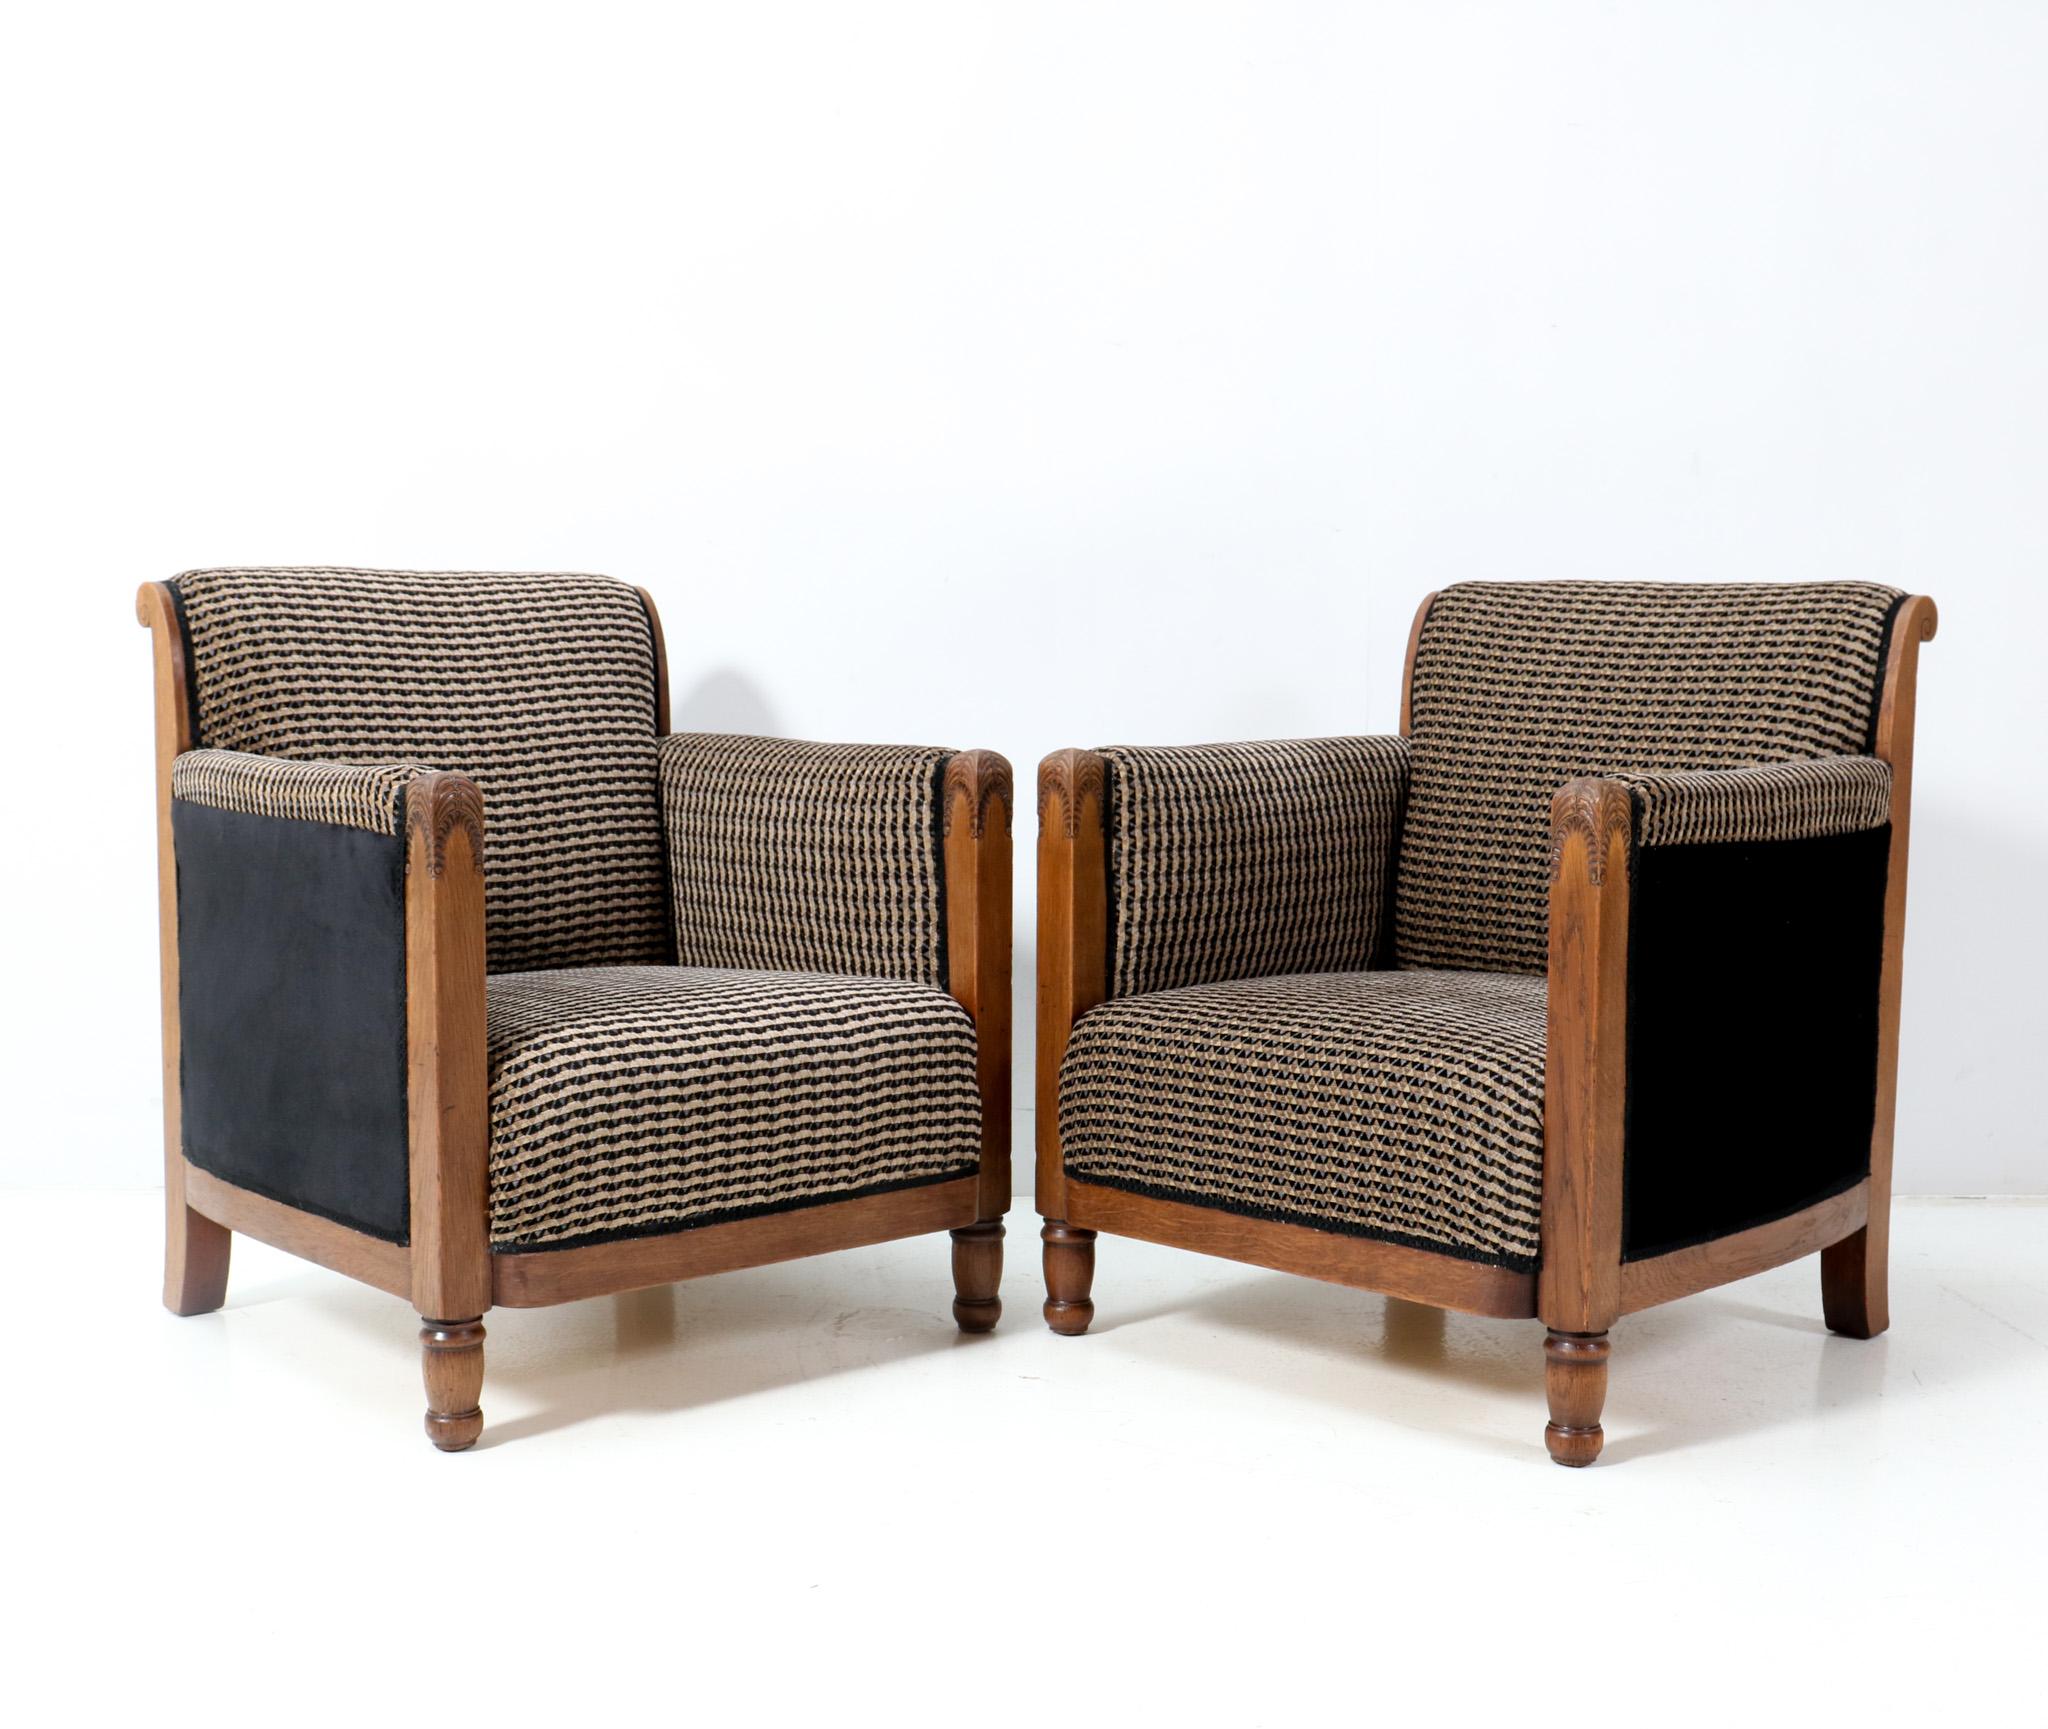 Fabric Two Oak Art Deco Amsterdamse School Lounge Chairs by Chris Bartels, 1920s